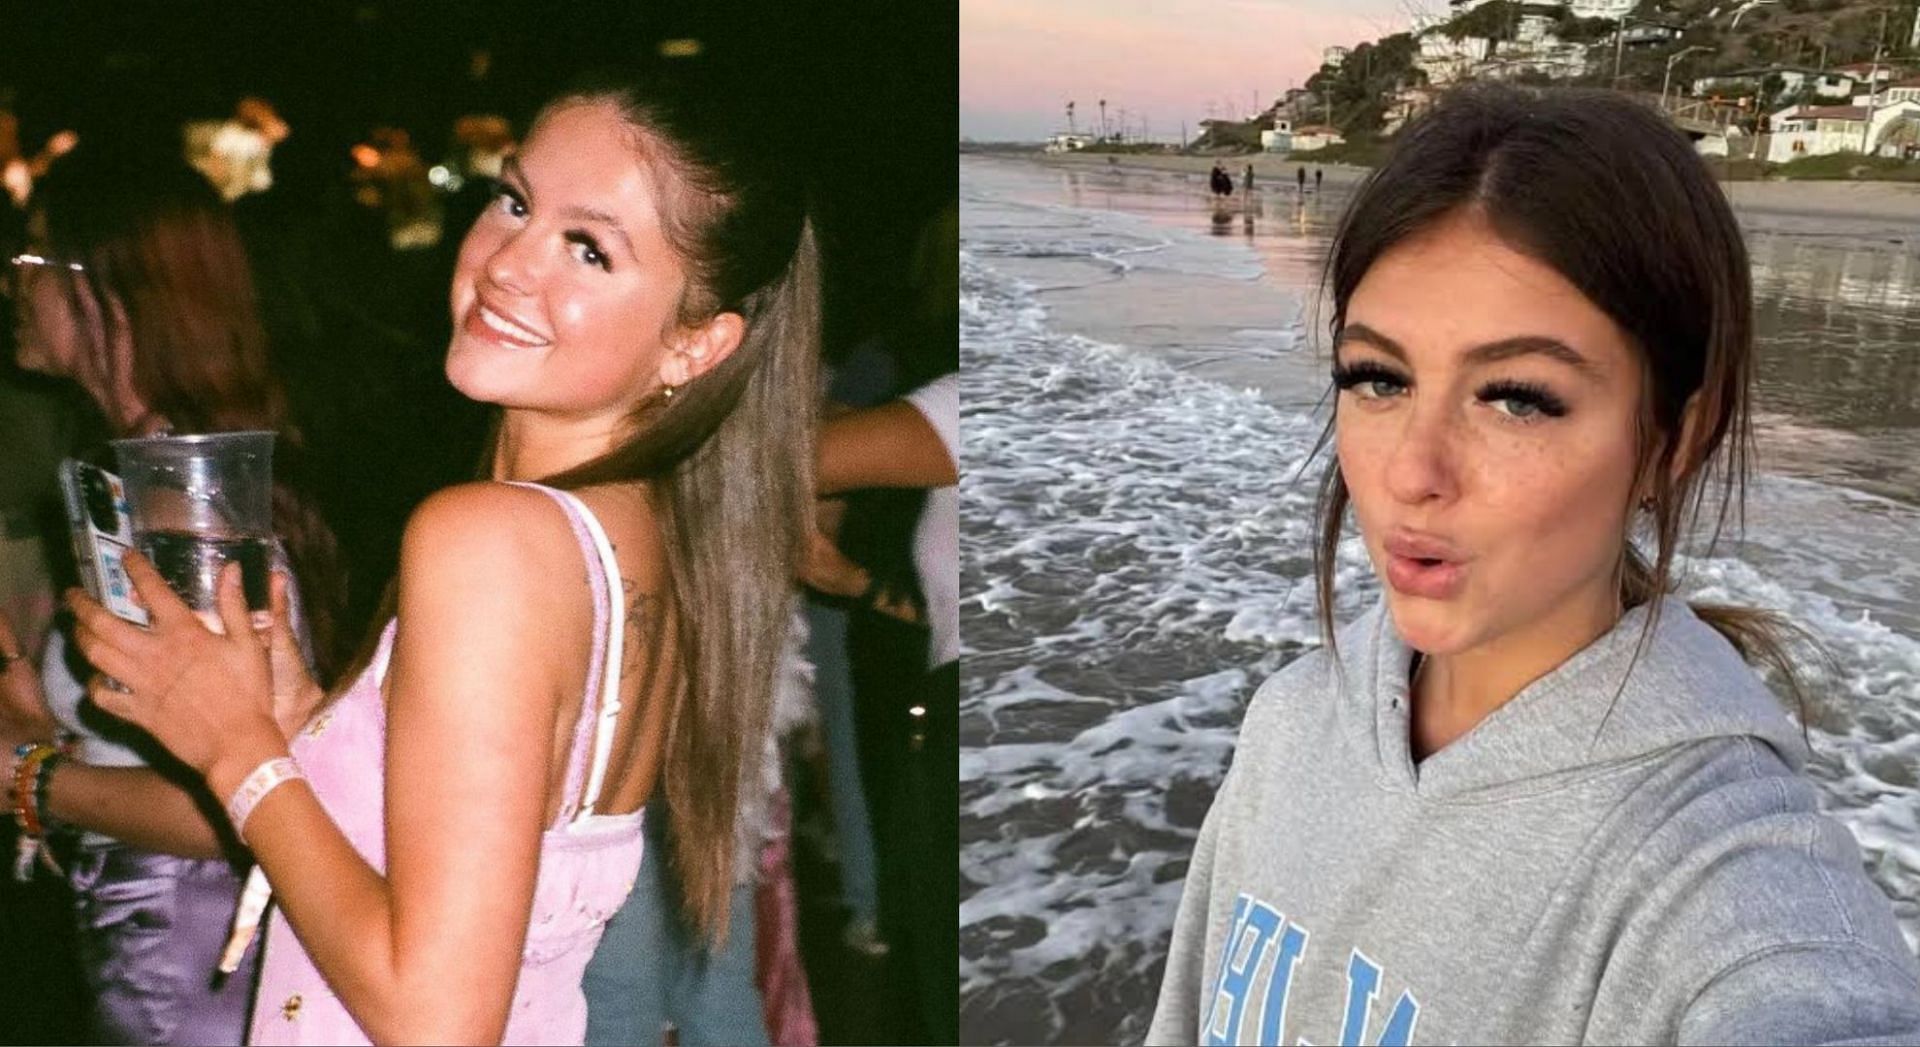 First the bird, then pit and now this?” Taraswrld controversy explained as TikTok star sparks outrage with comments on girls